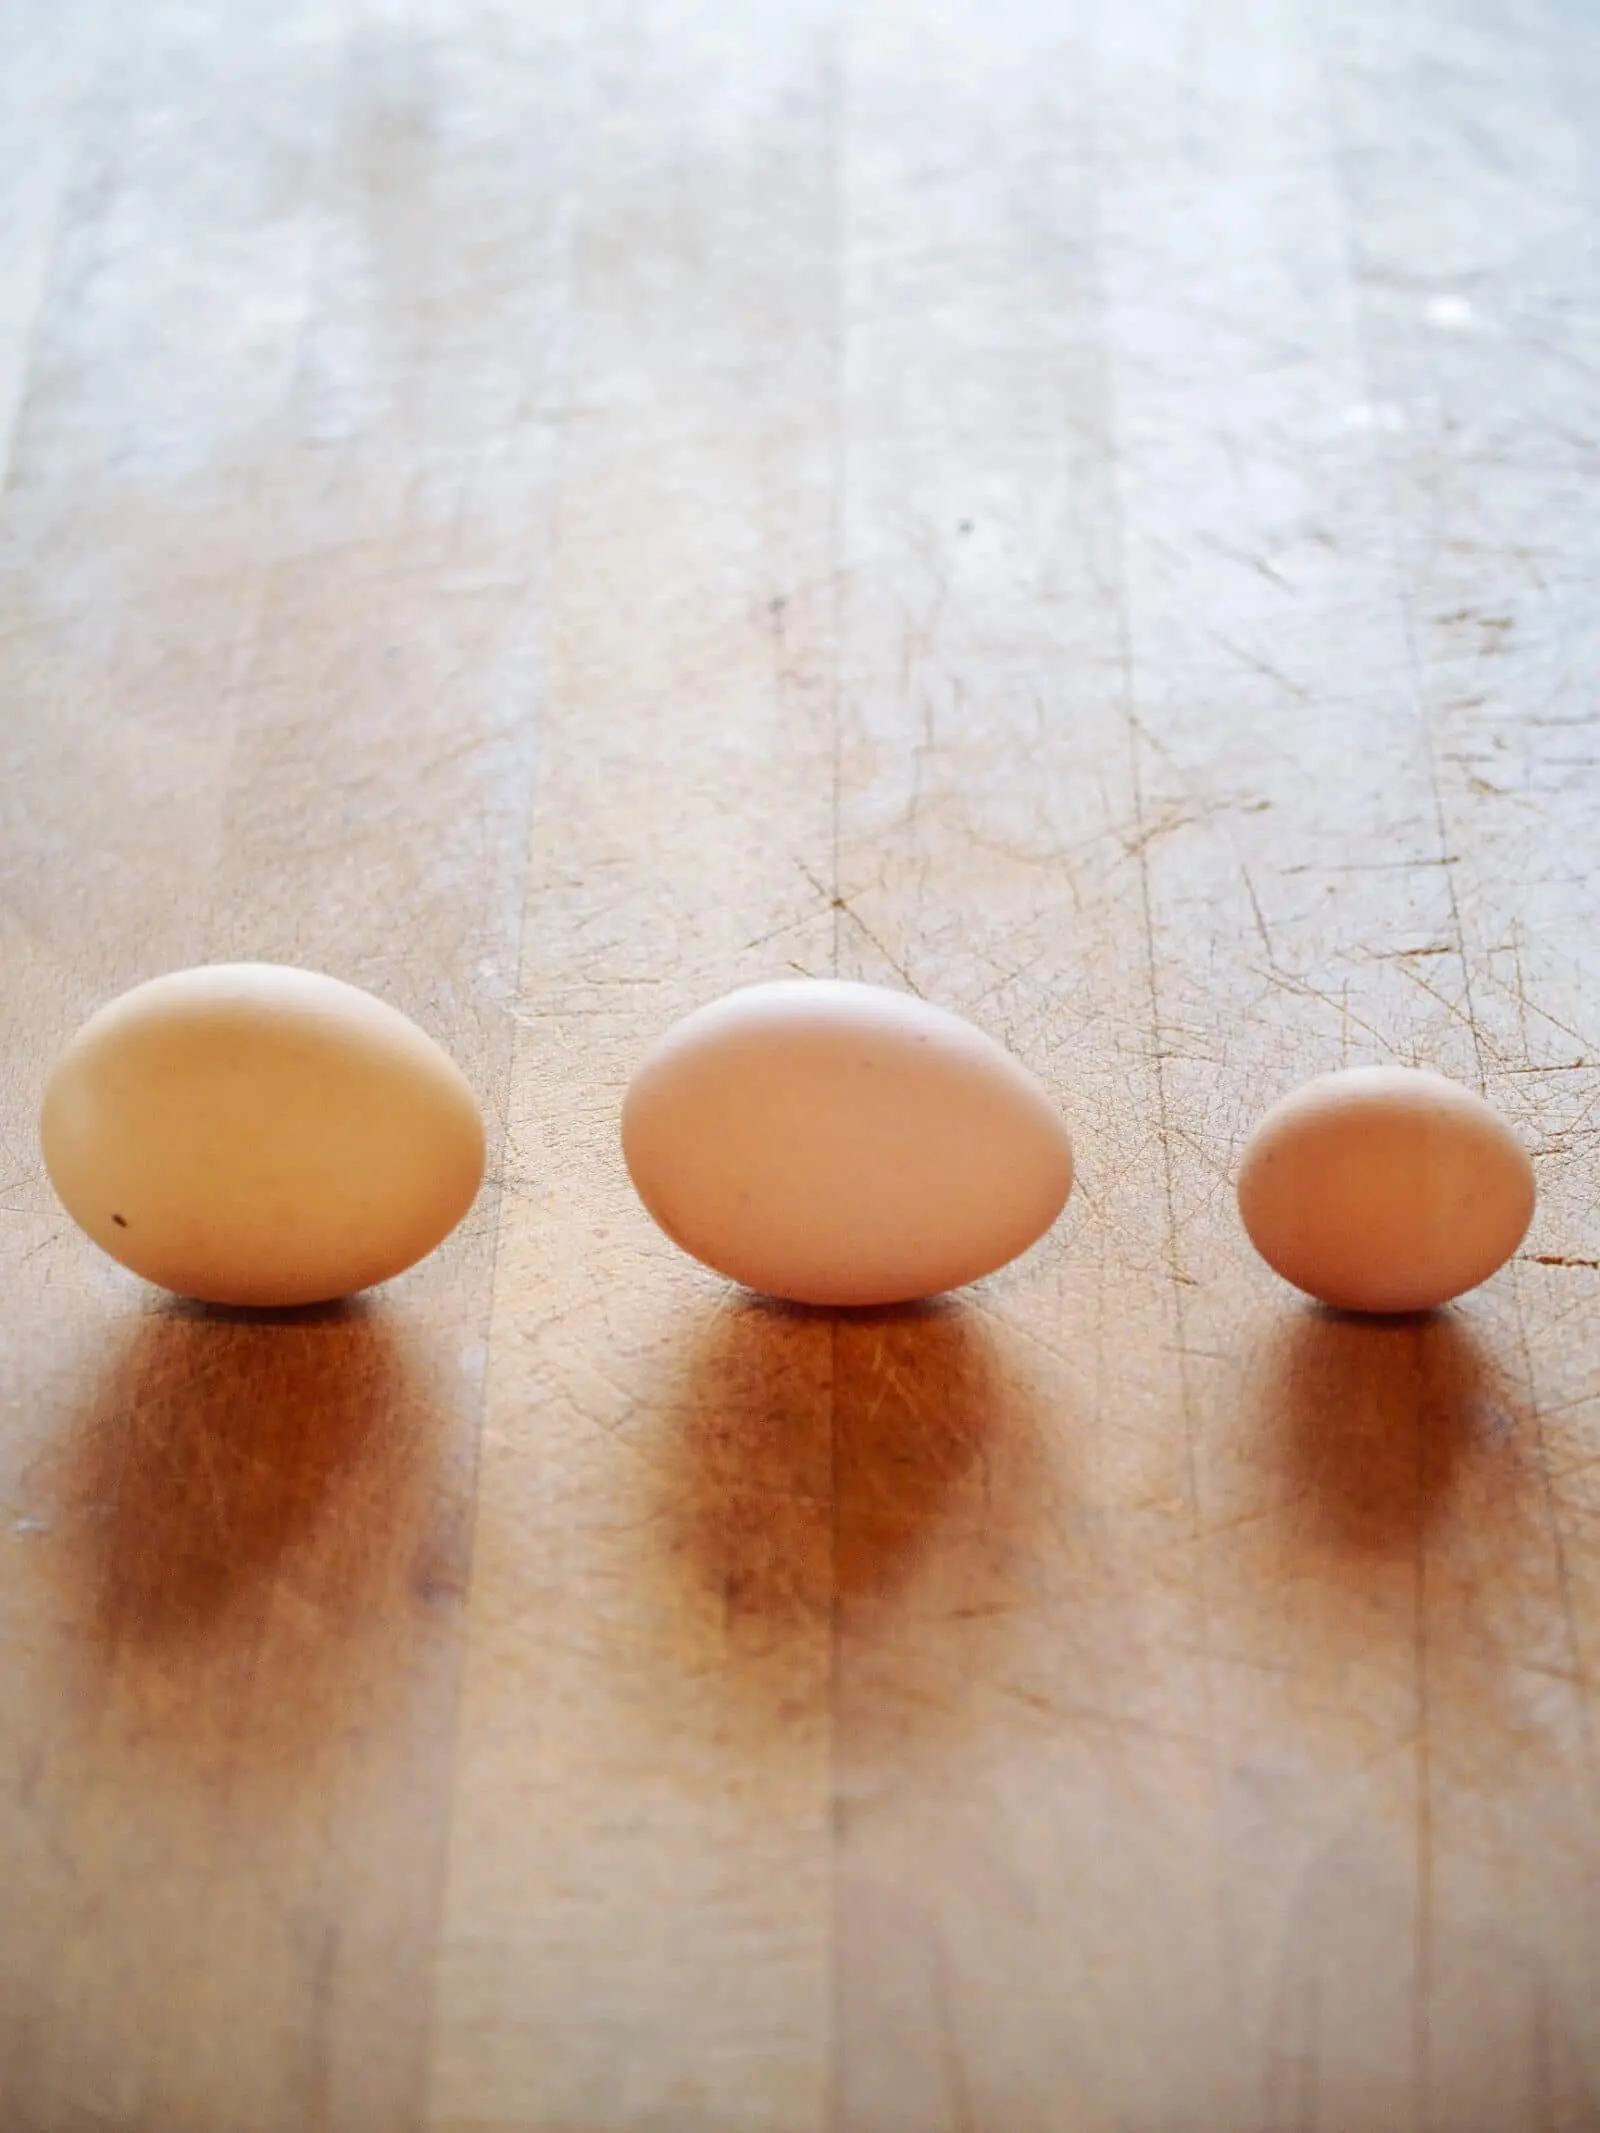 What Do Tiny Chicken Eggs Look Like?